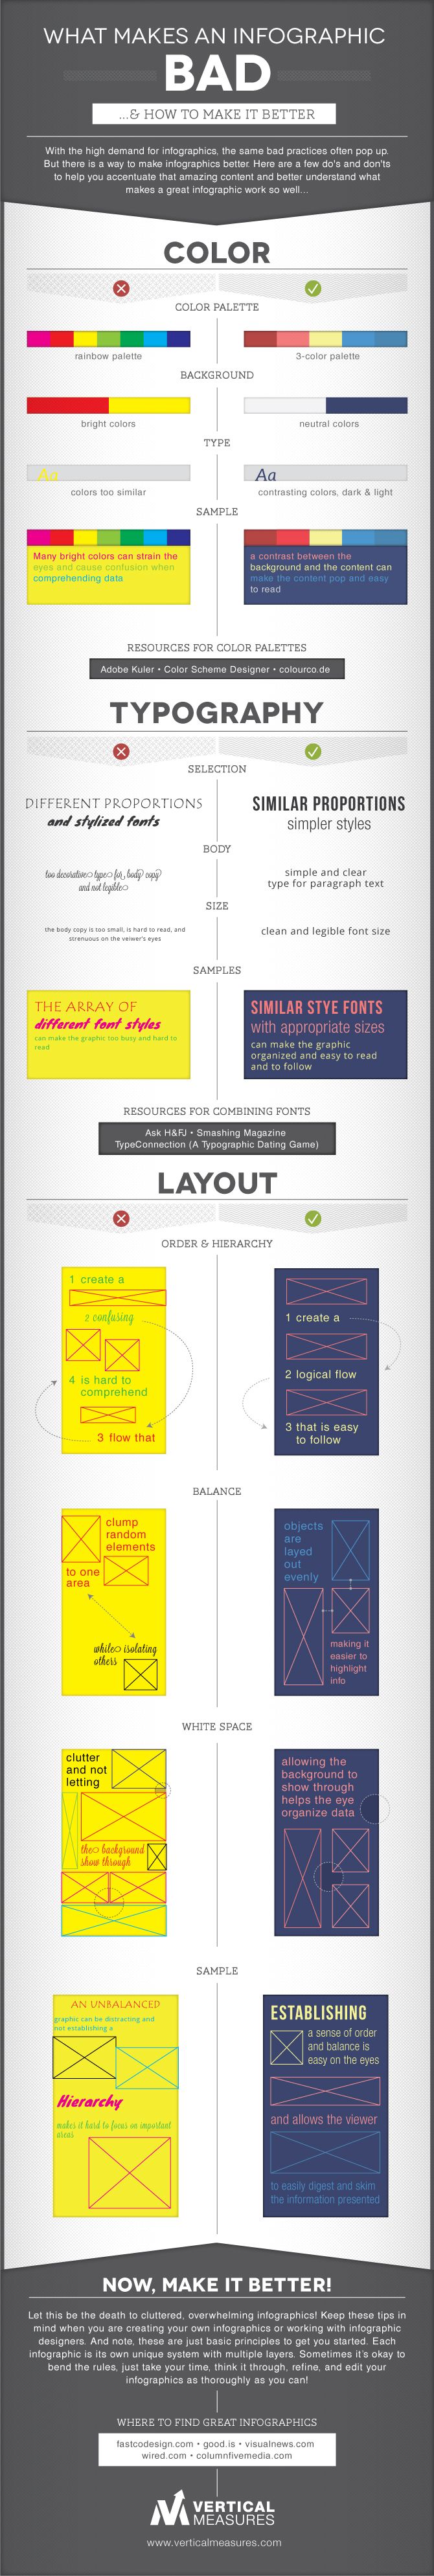 How a Badly Designed Infographic Can Kill Its Purpose and How to Get it Right! - Infographic